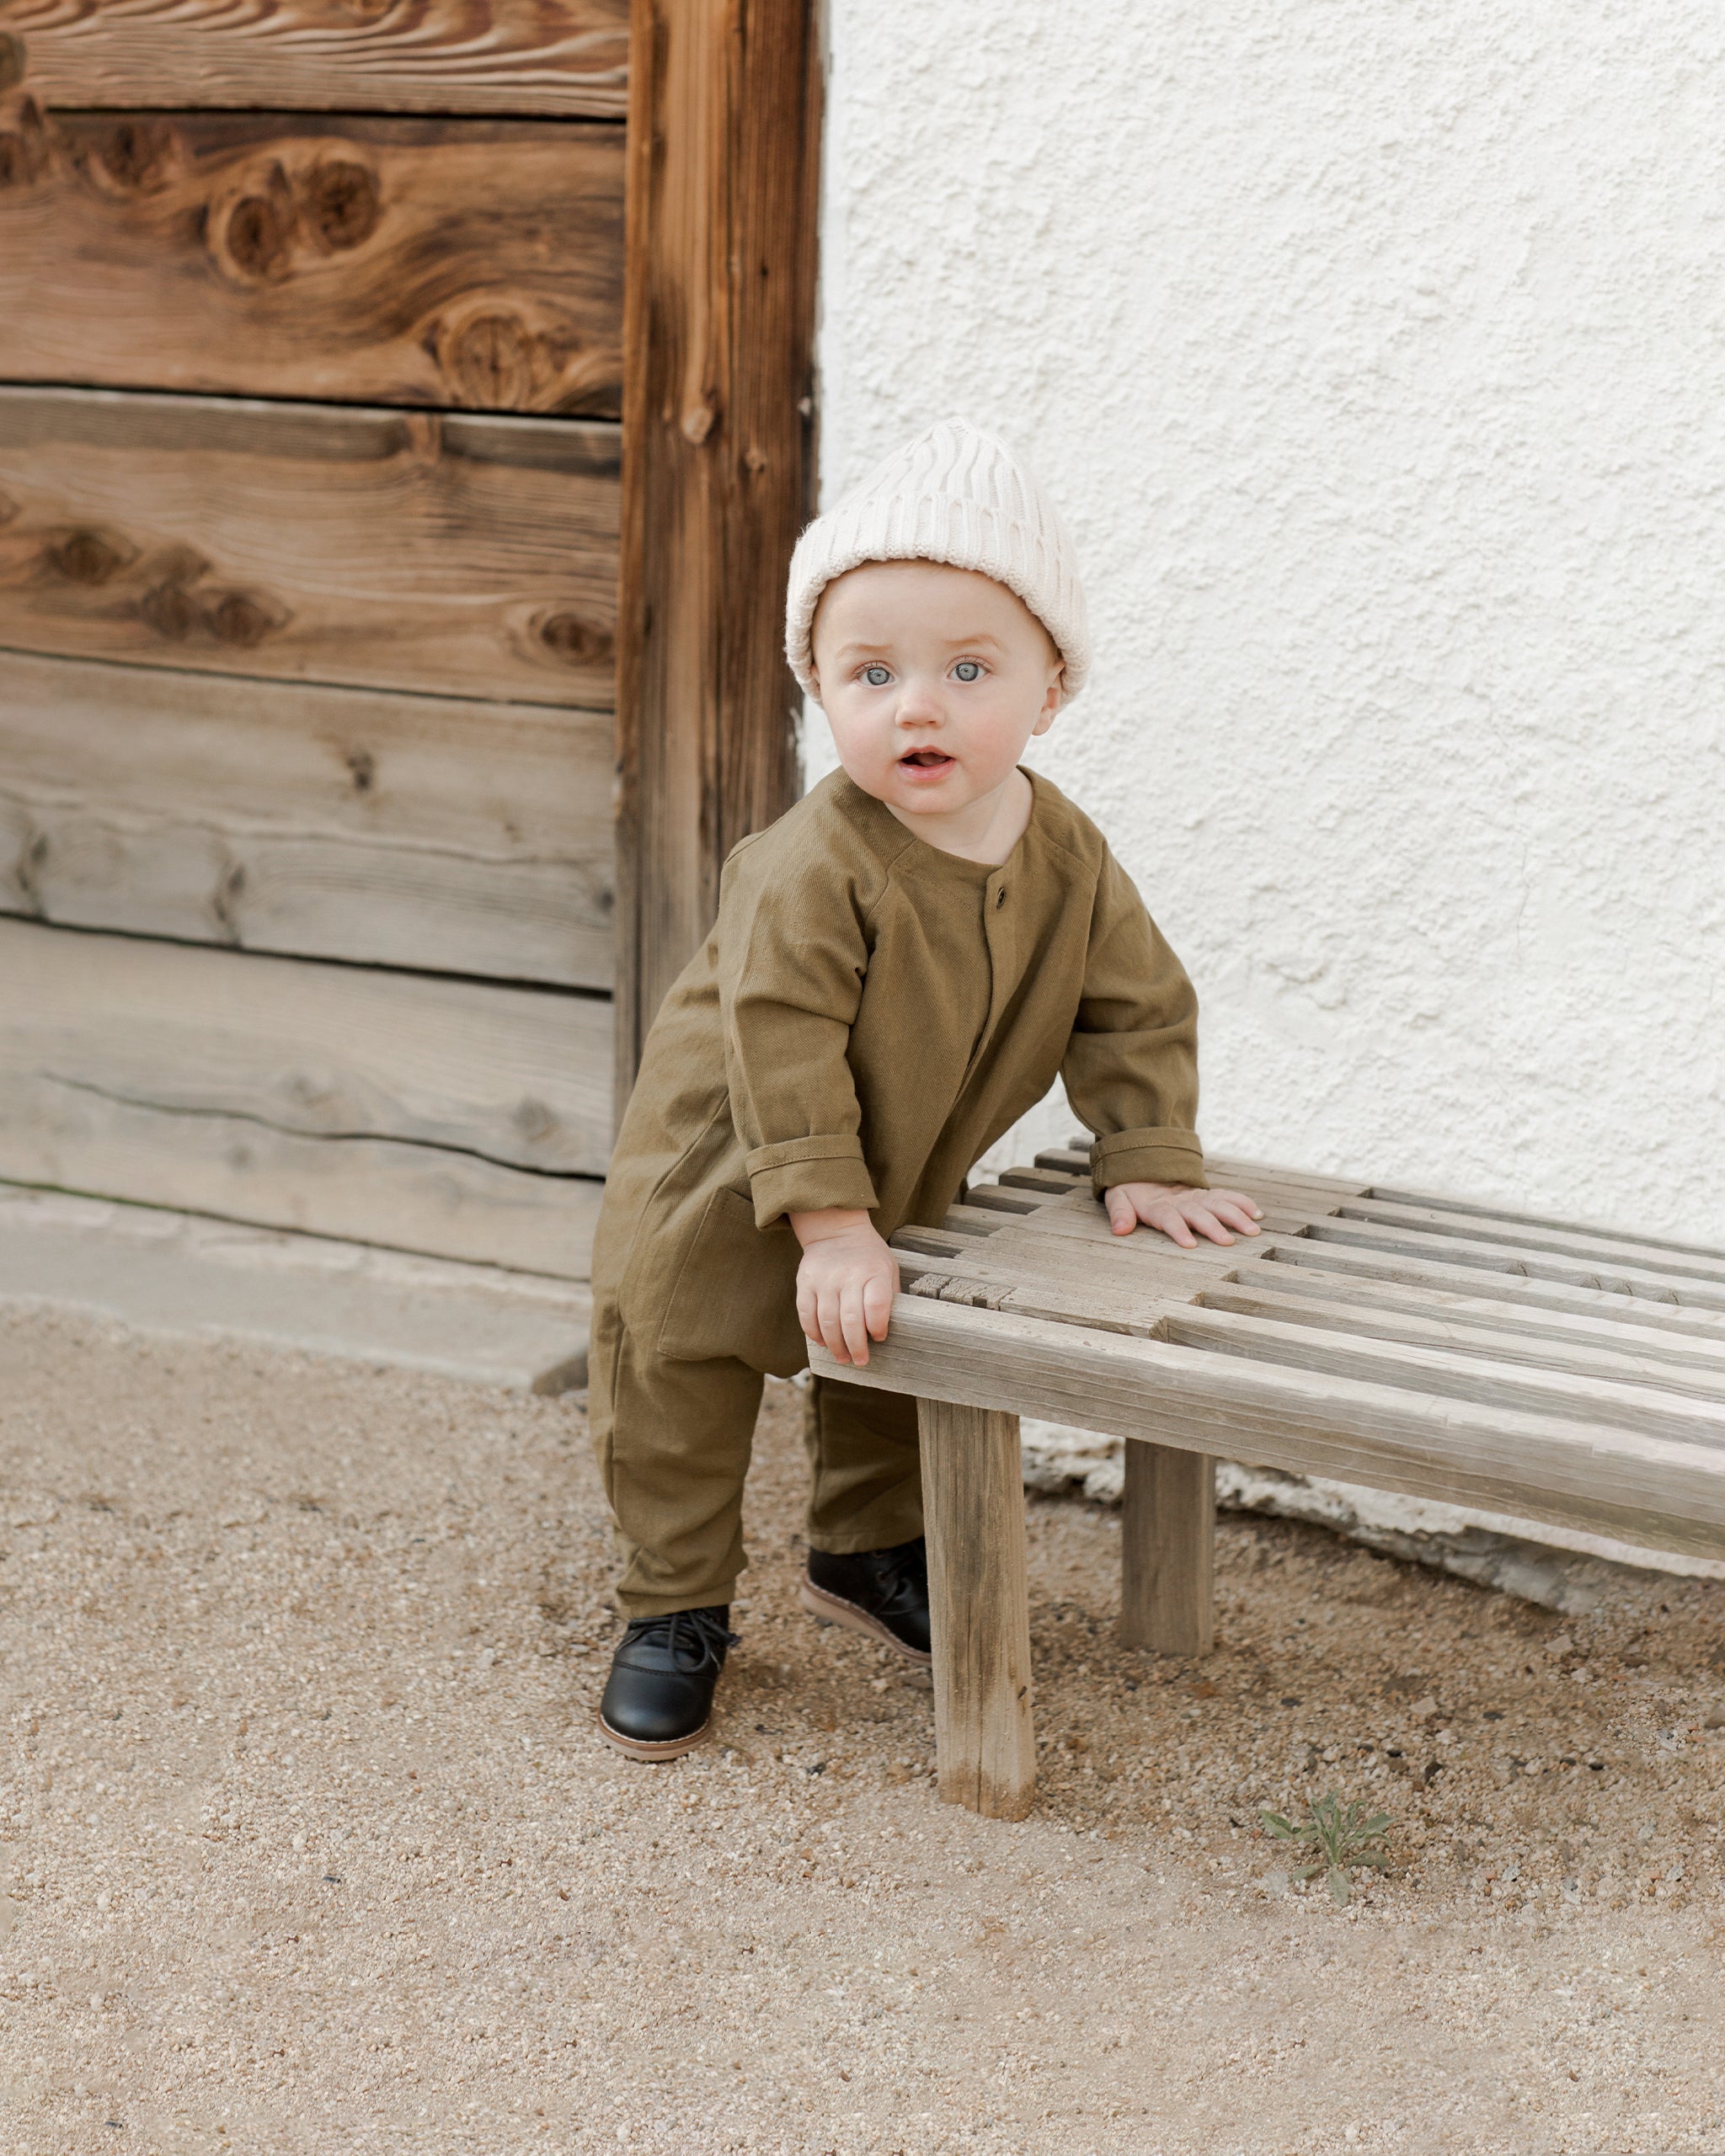 Baby Romper - Baby Clothing for Fall